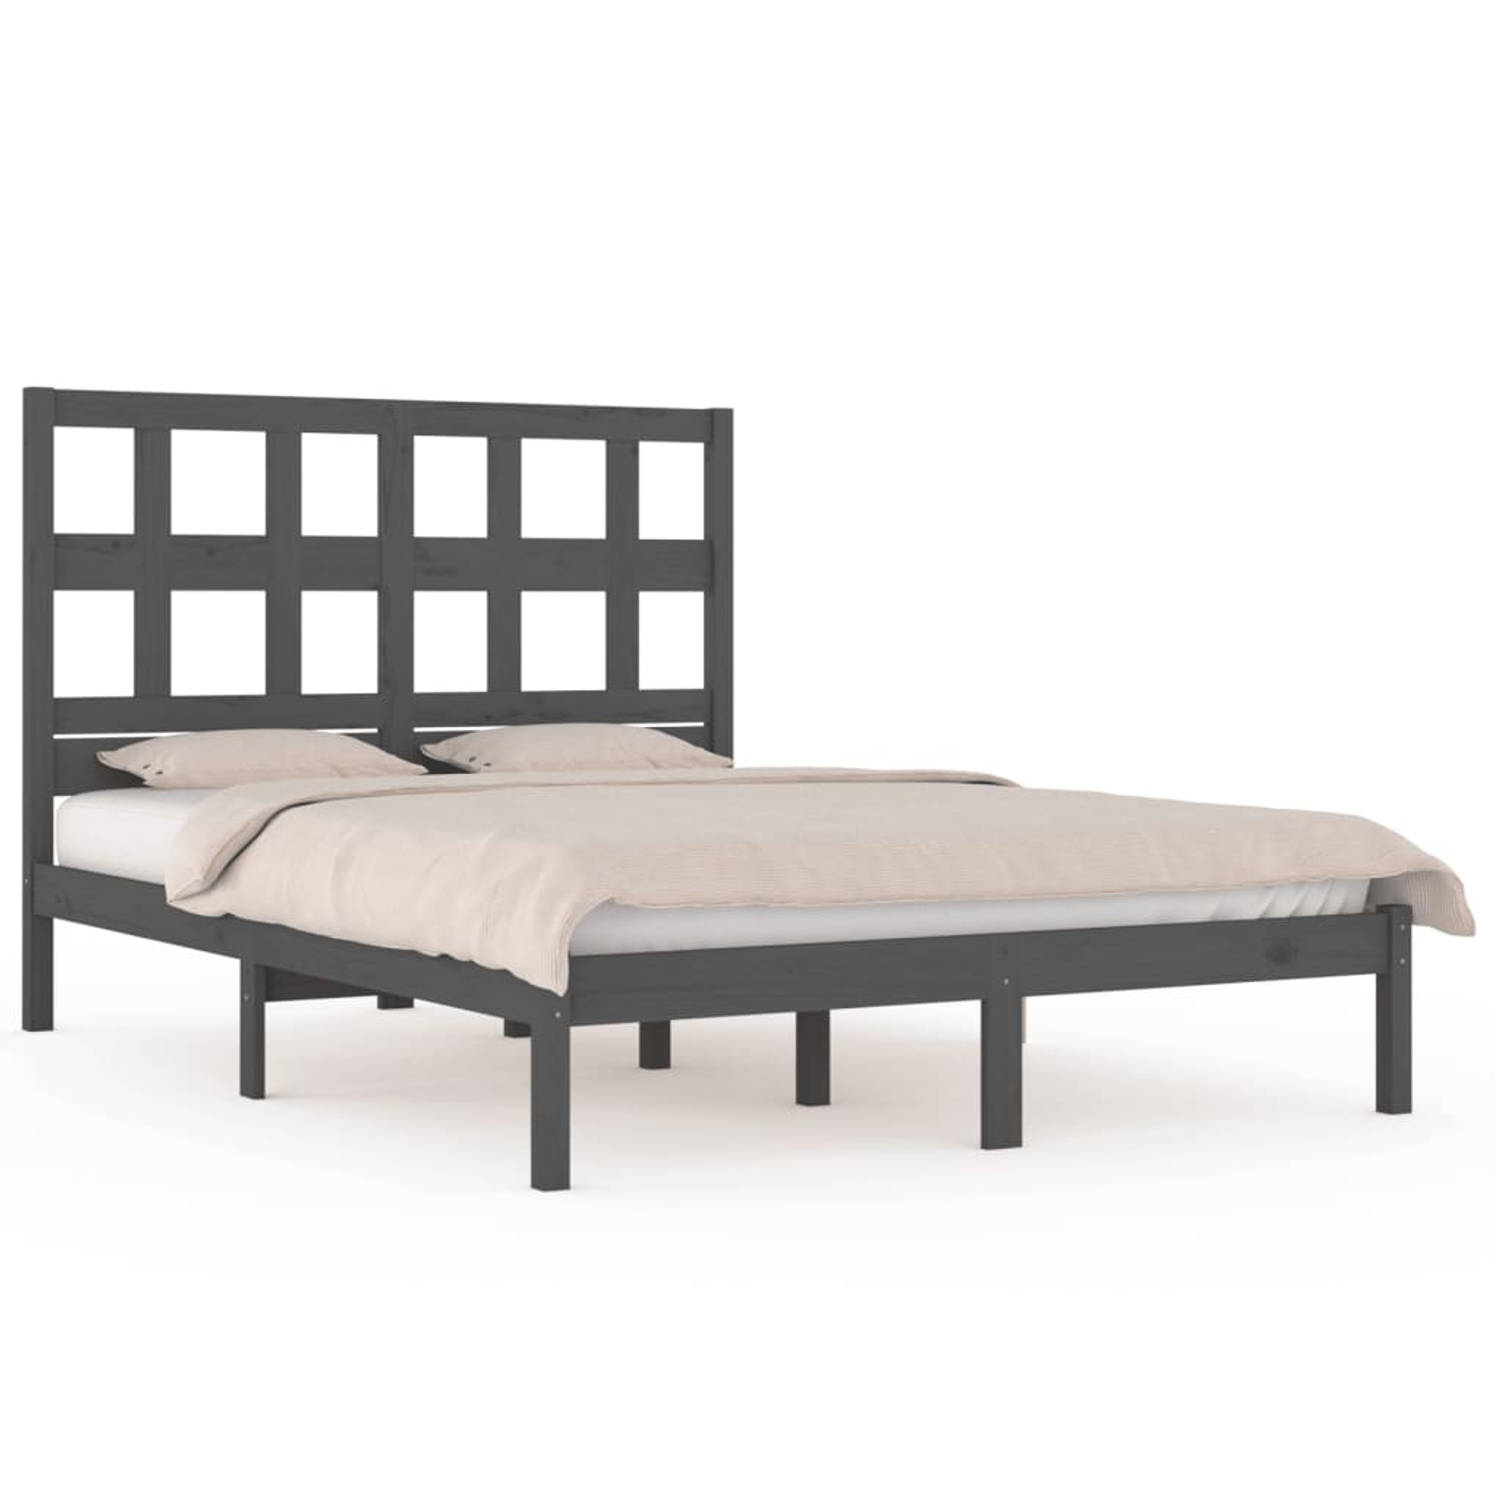 The Living Store Bedframe massief grenenhout grijs 120x190 cm 4FT Small Double - Bed